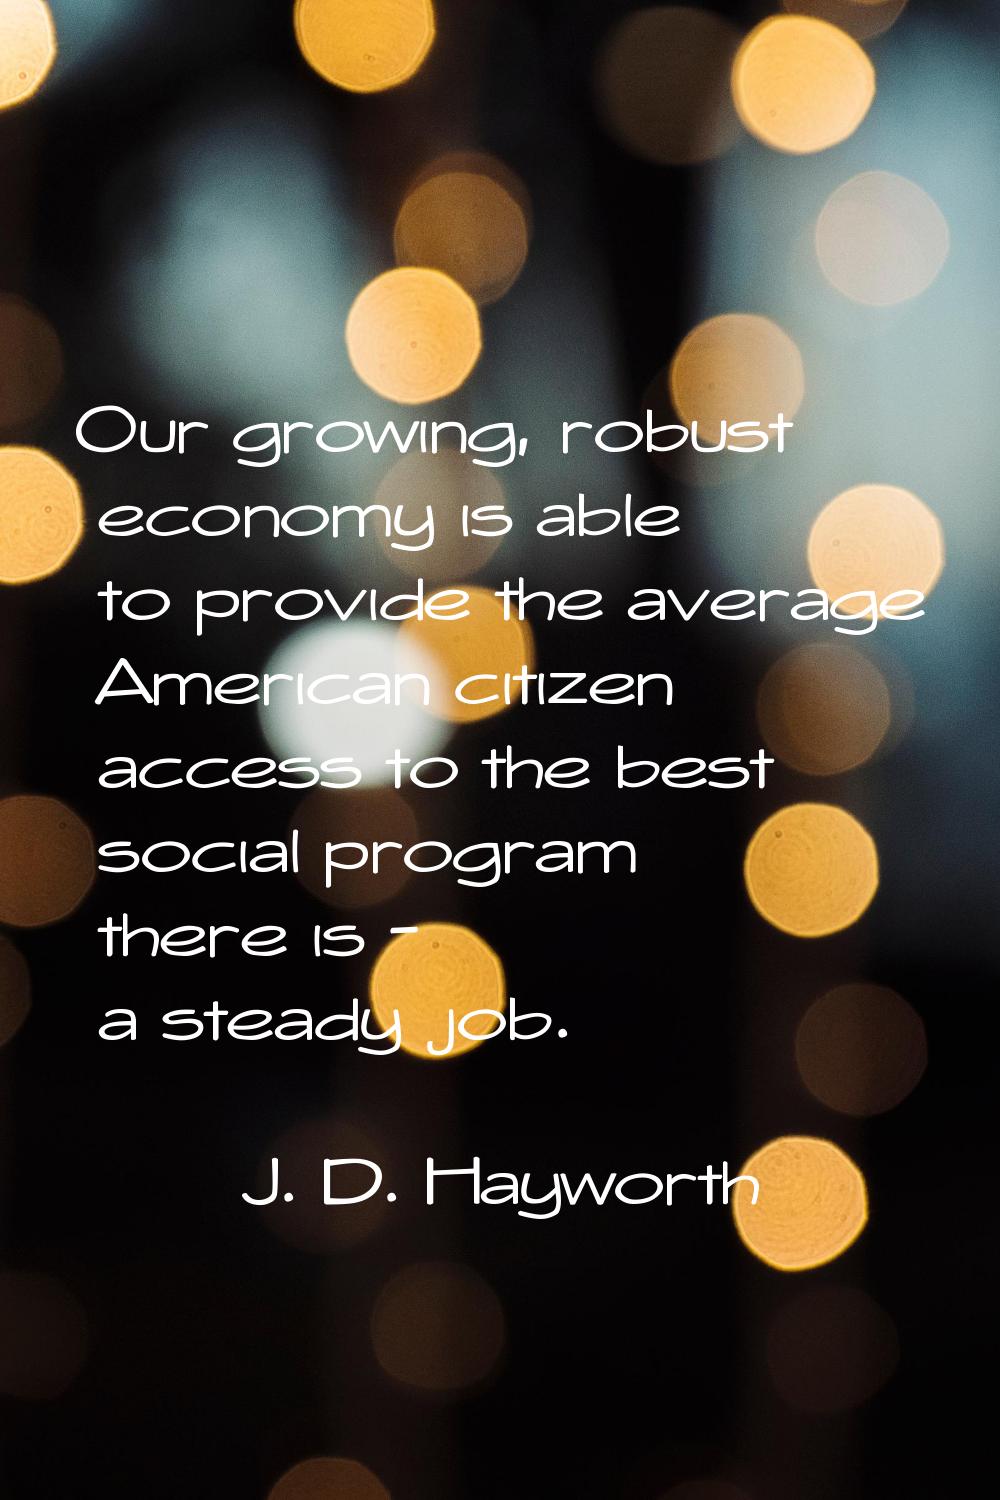 Our growing, robust economy is able to provide the average American citizen access to the best soci